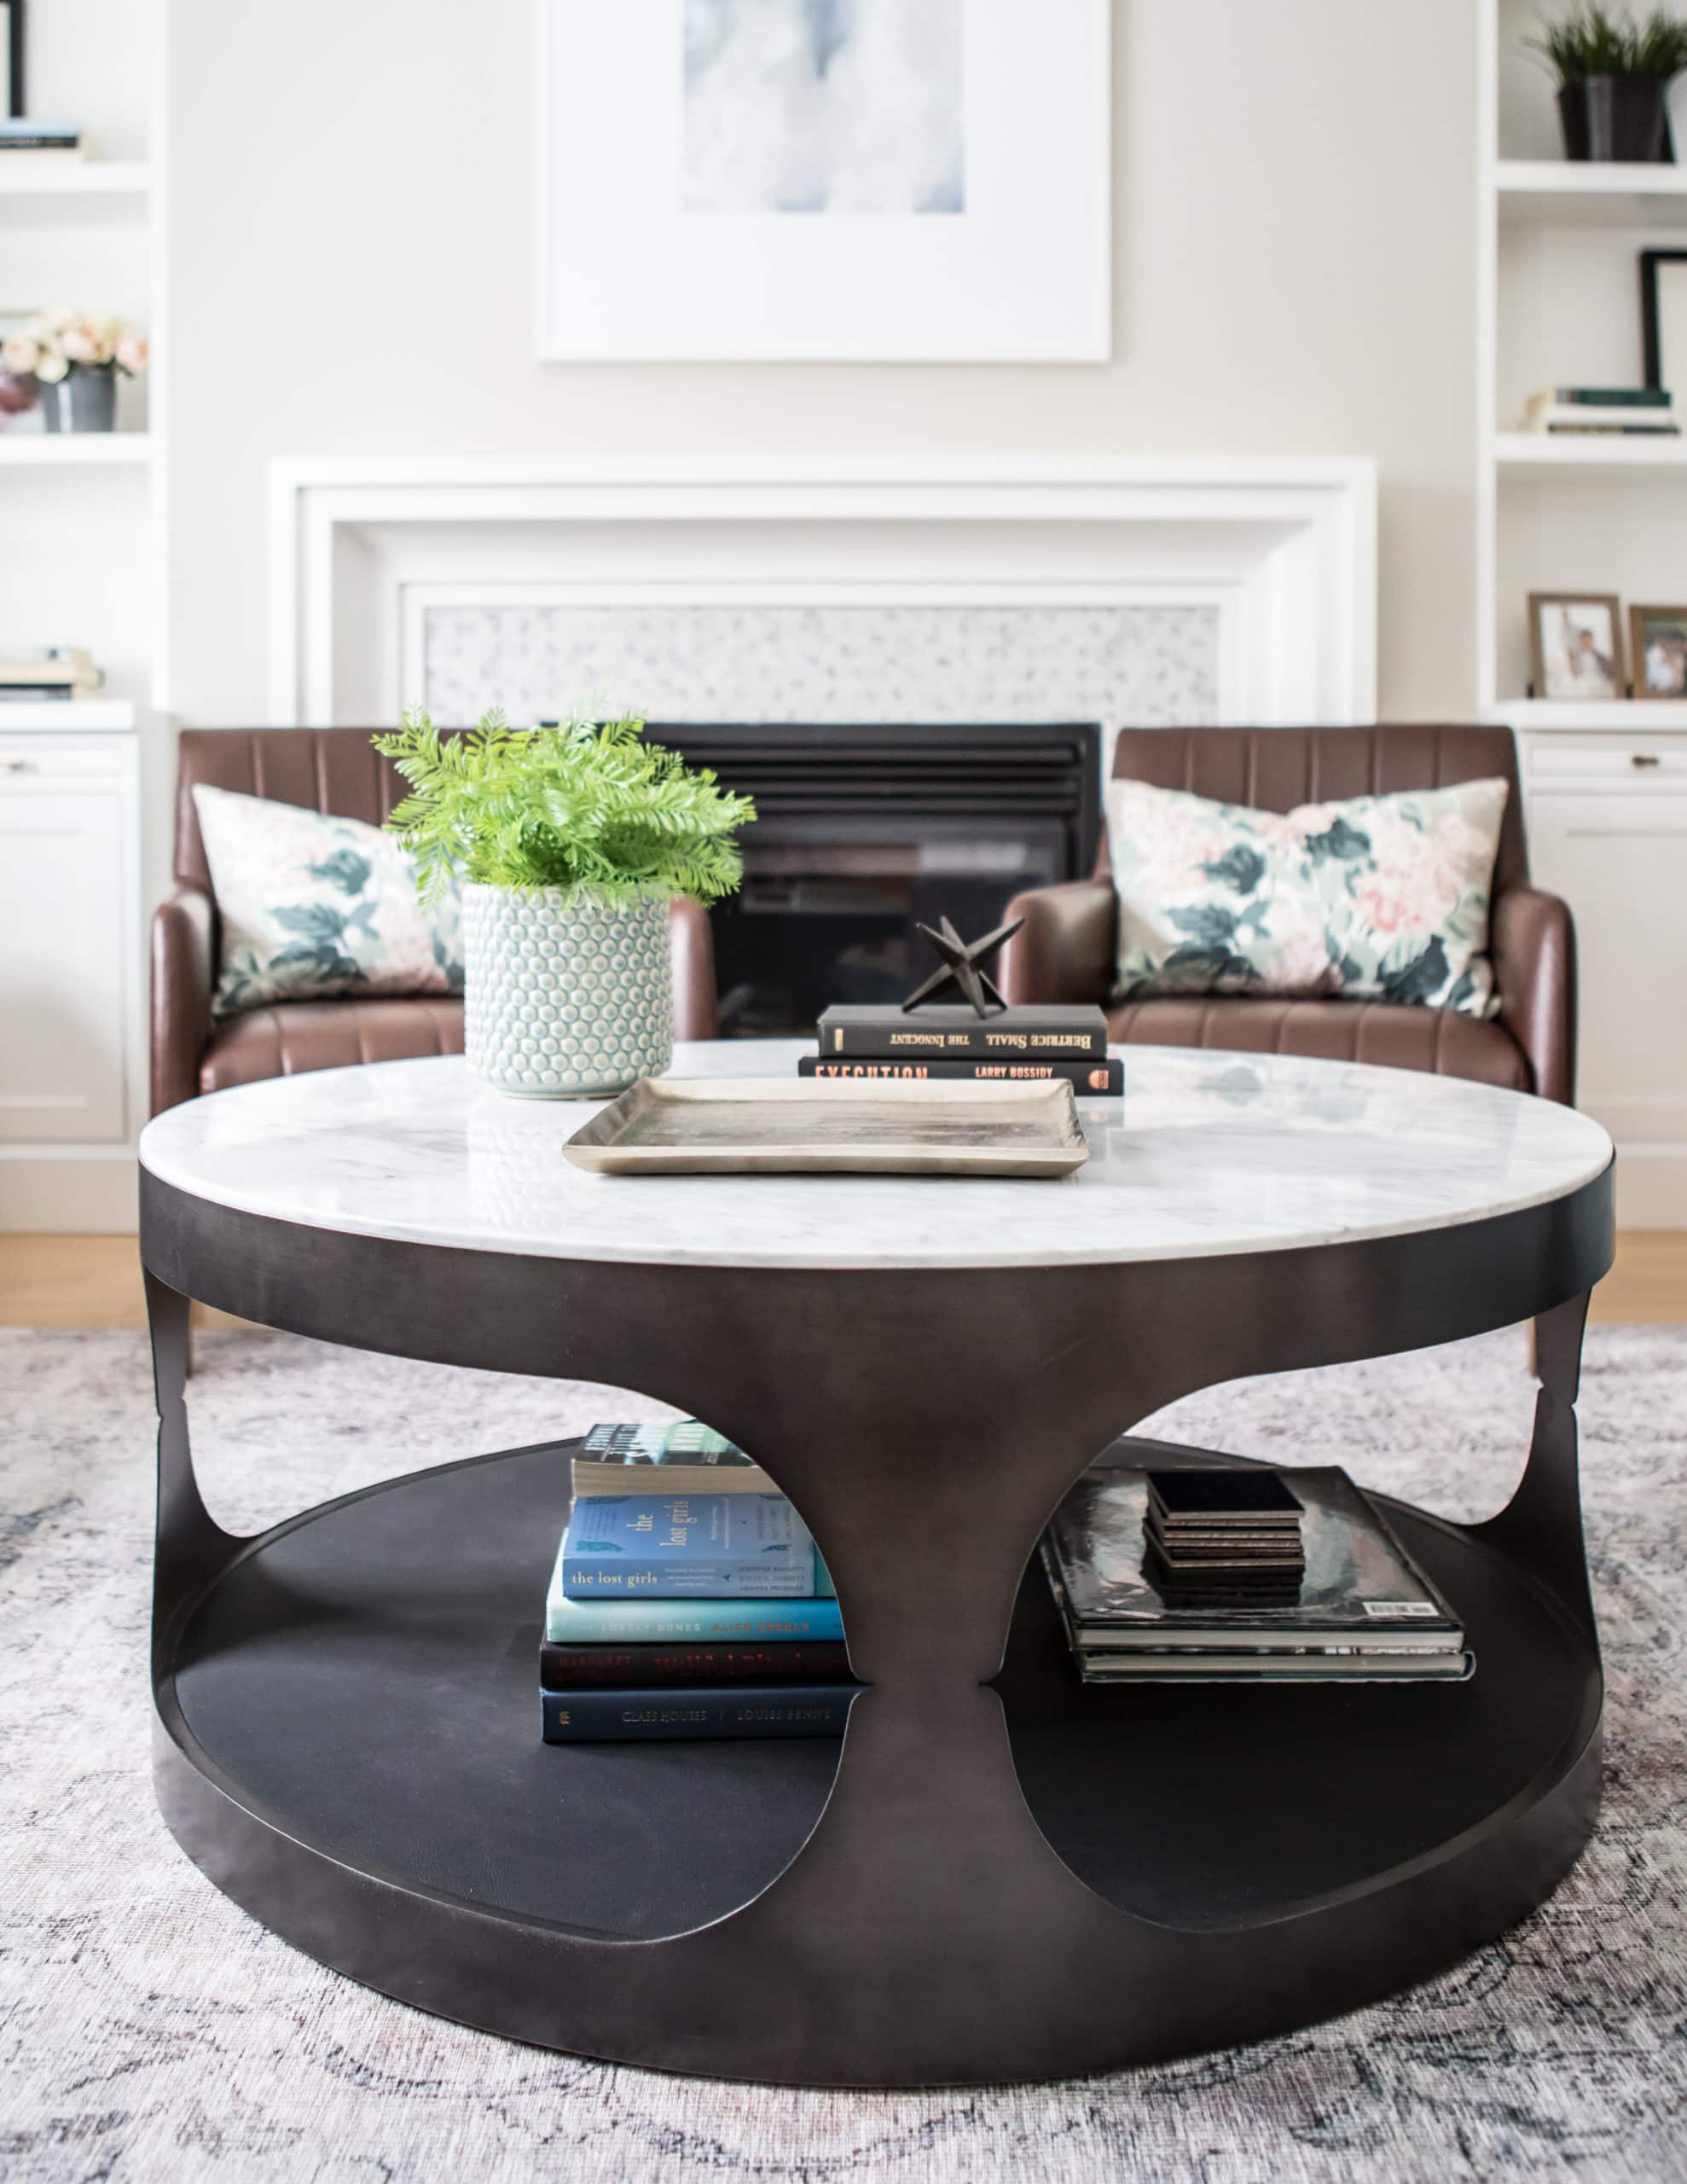 Modern, round table within a living room